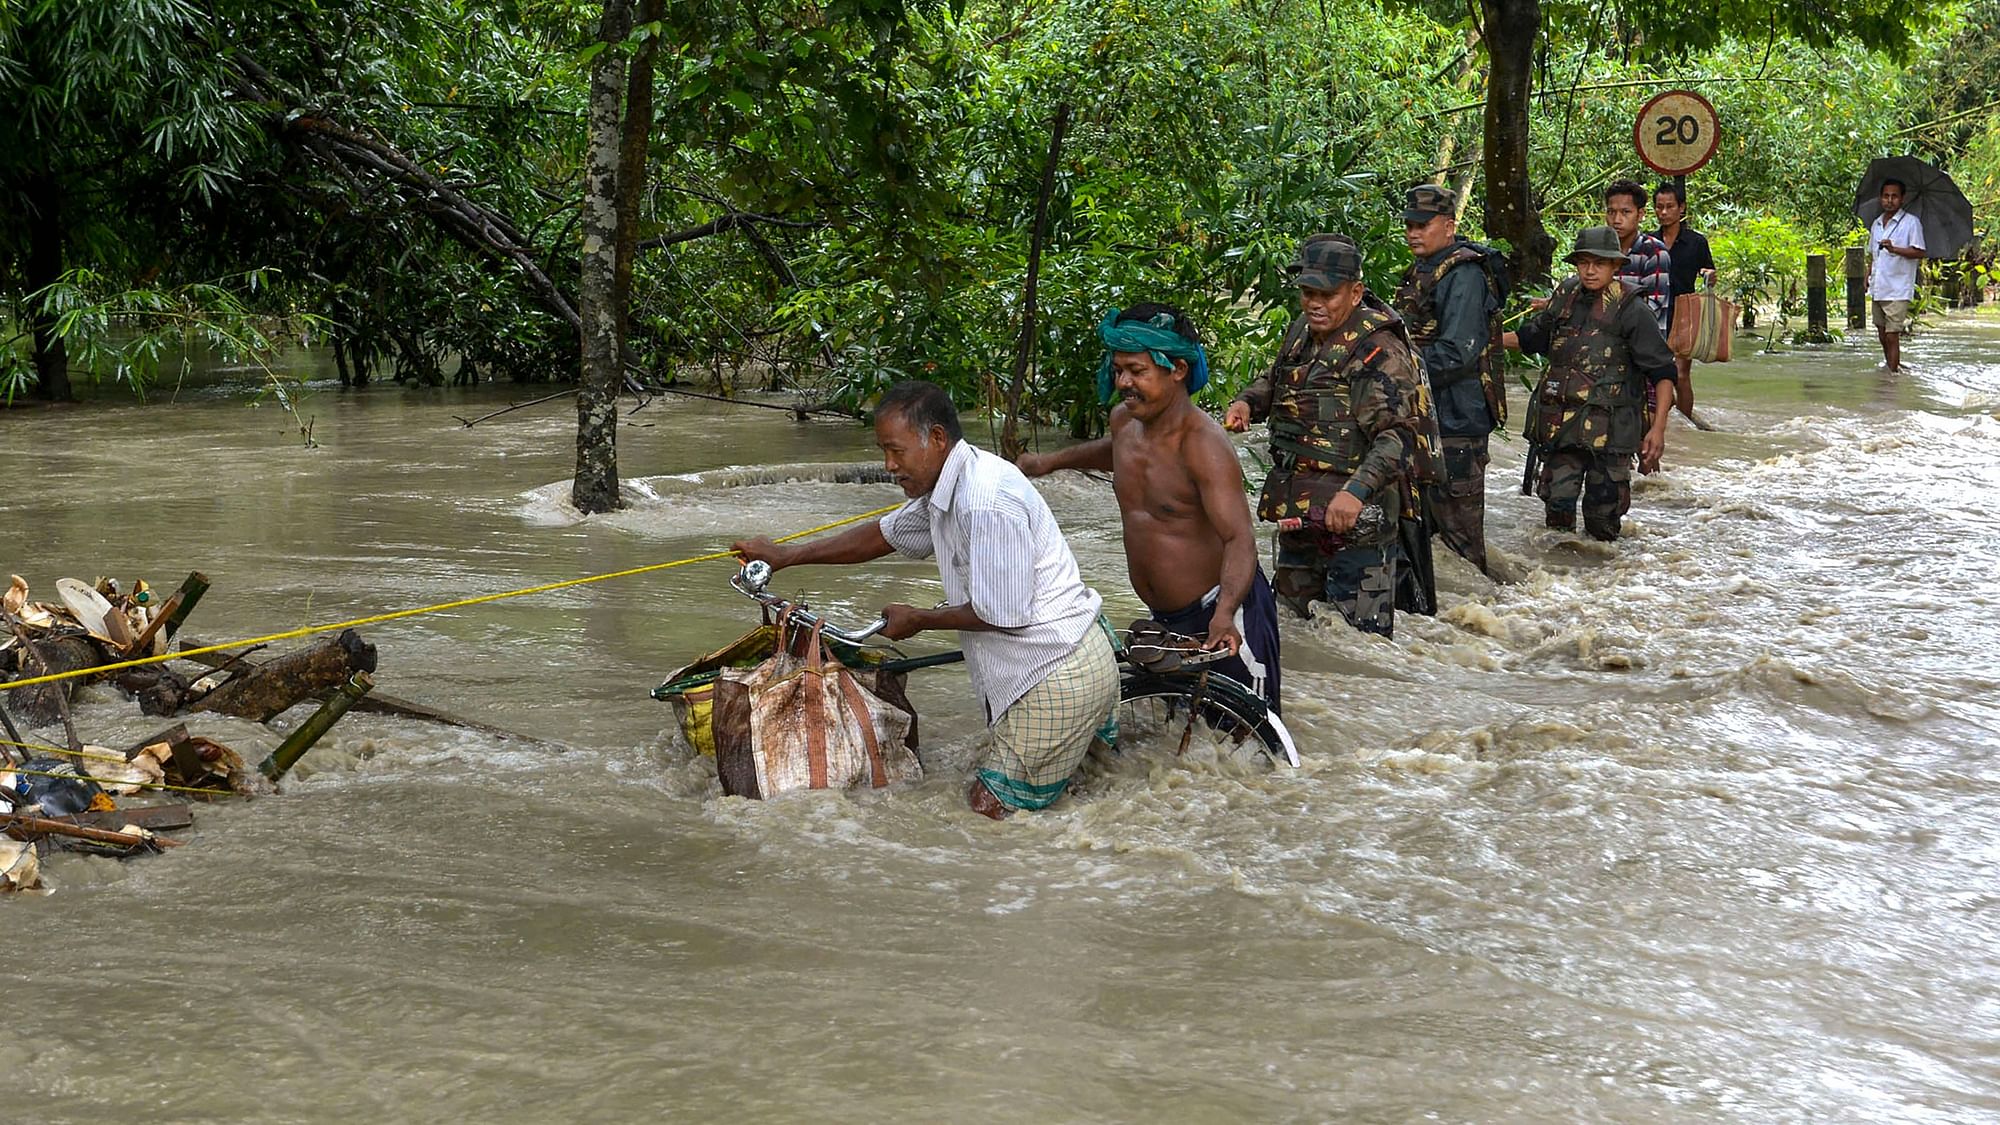 Assam Floods Key Highlights The Death Toll Remained At 86 With 13 Districts In The State Still 